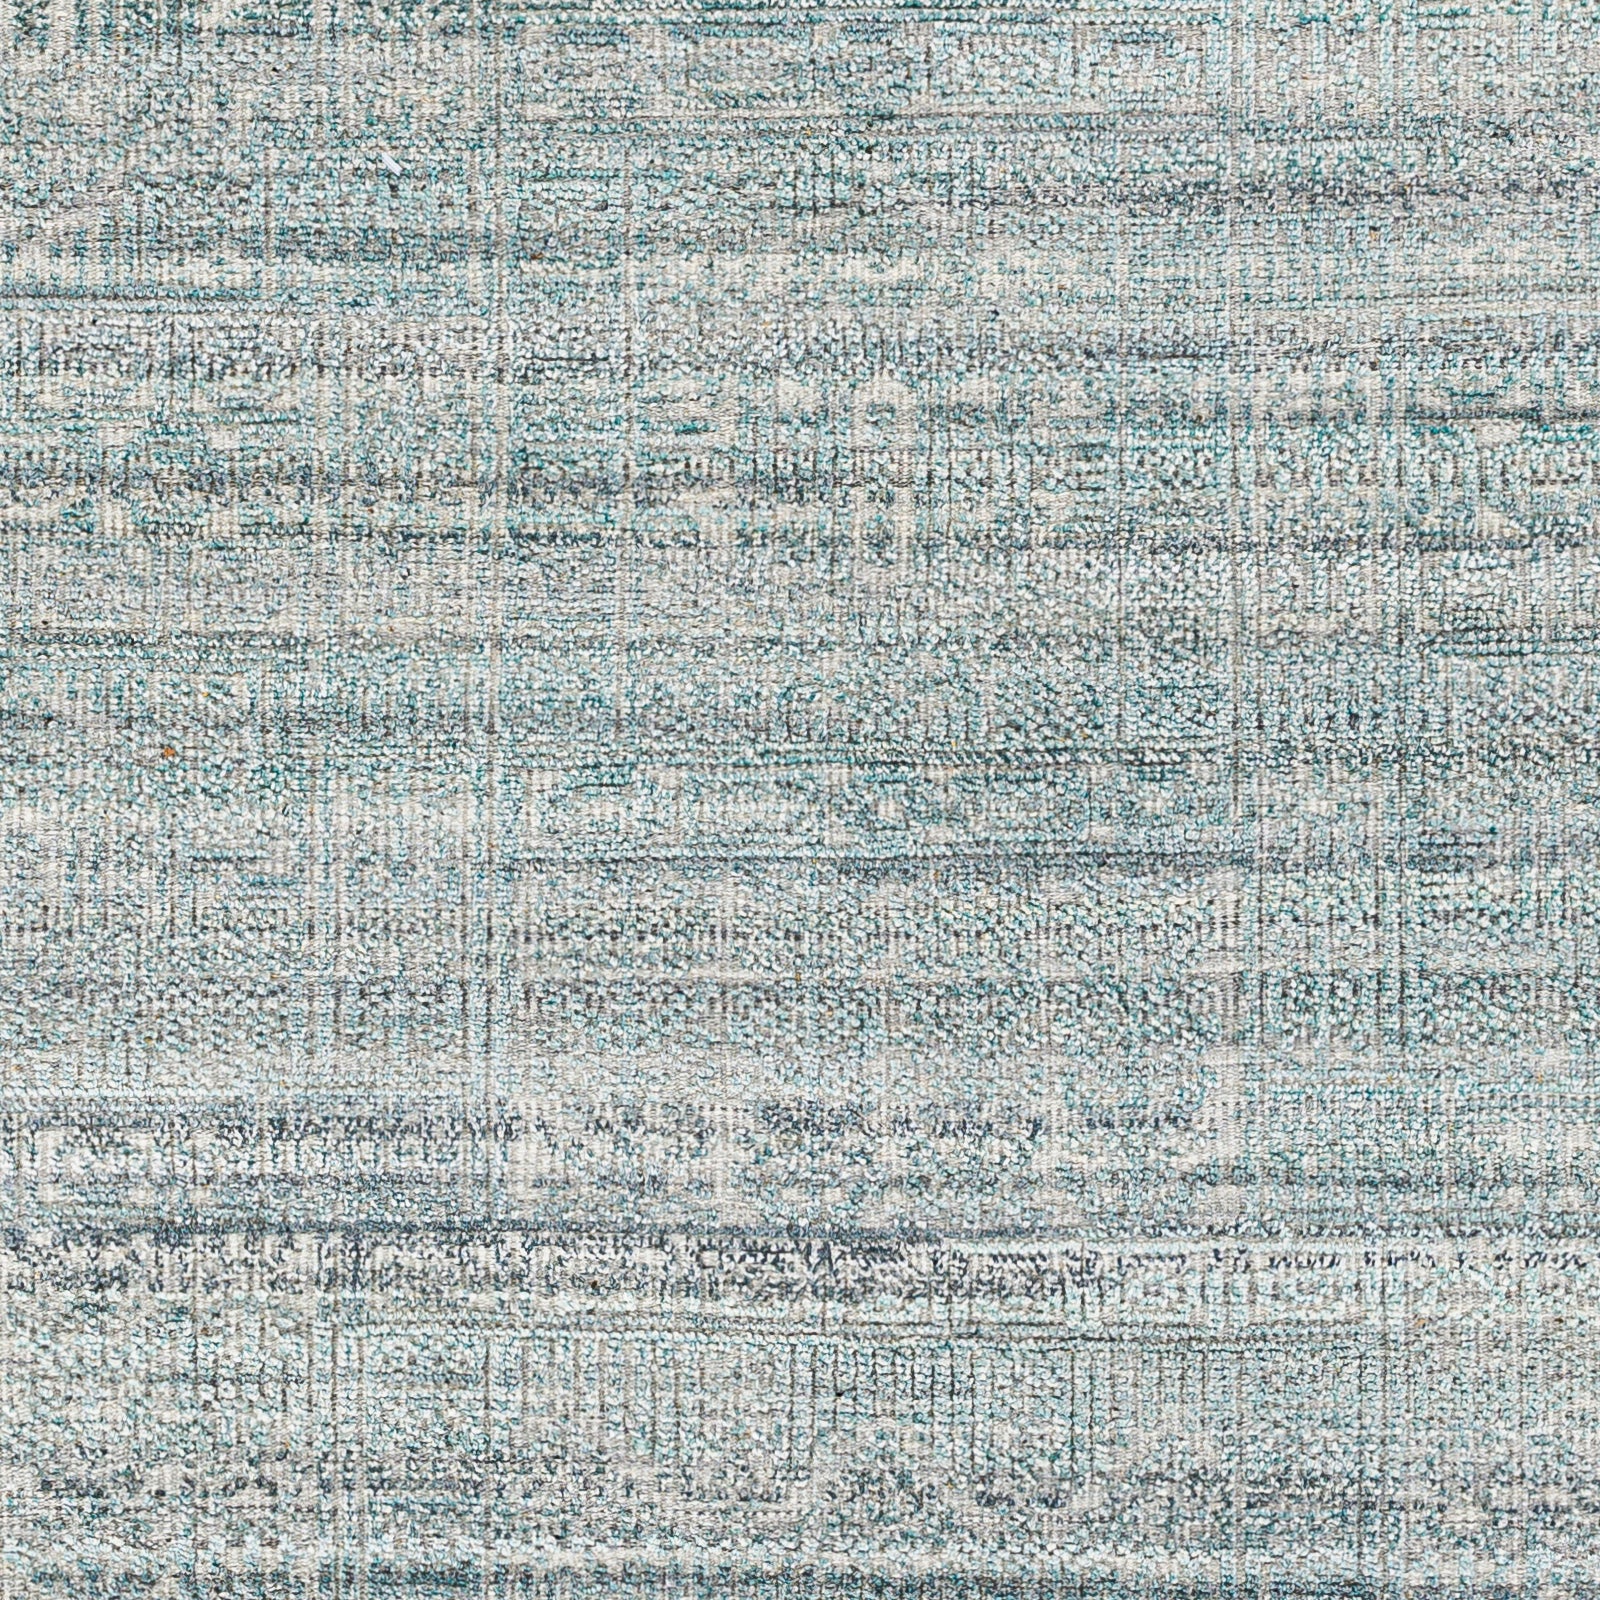 Add an elegant touch to any space with this hand-knotted Nobility Blue / Grey Rug. Its blend of wool and viscose is ultra soft and smooth, while its timeless ornate motif with modern lines create an exquisite, timeless piece. Enjoy its high-low characteristics and luxurious feel to add a touch of sophistication to your home that fits any lifestyle. Amethyst Home provides interior design, new construction, custom furniture, and area rugs in the Rosemary Beach metro area